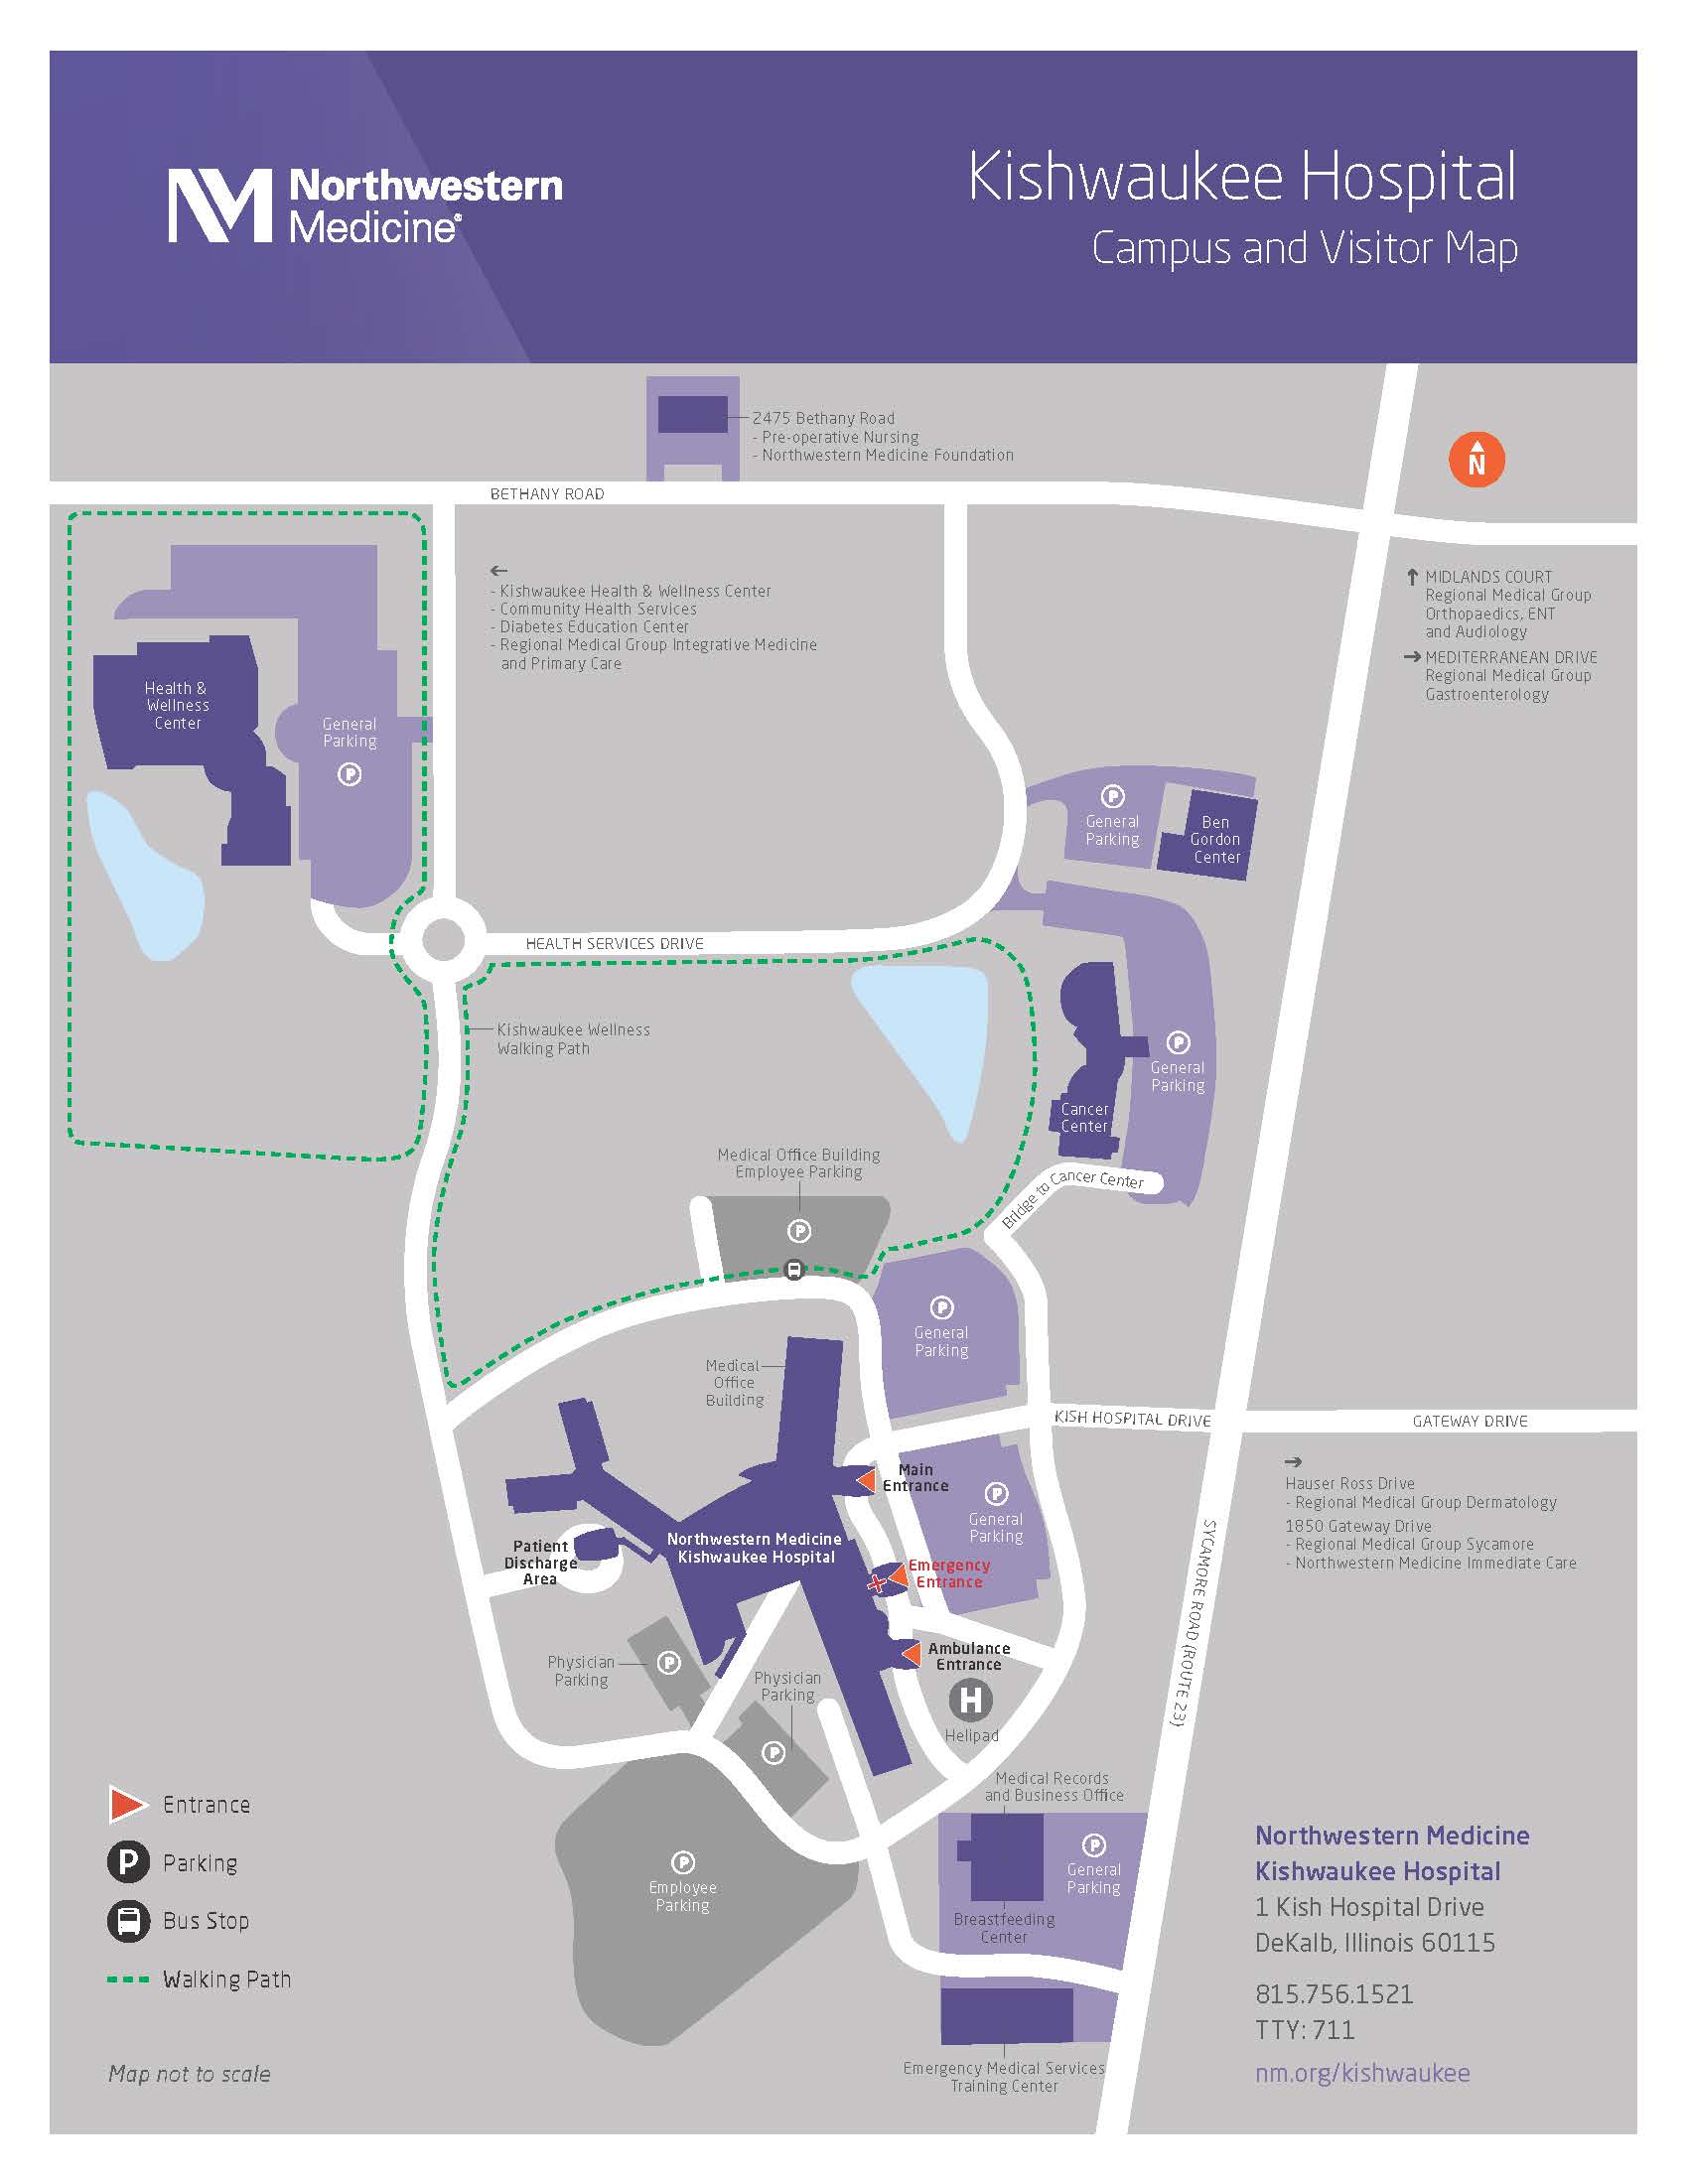 Services and Amenities Map